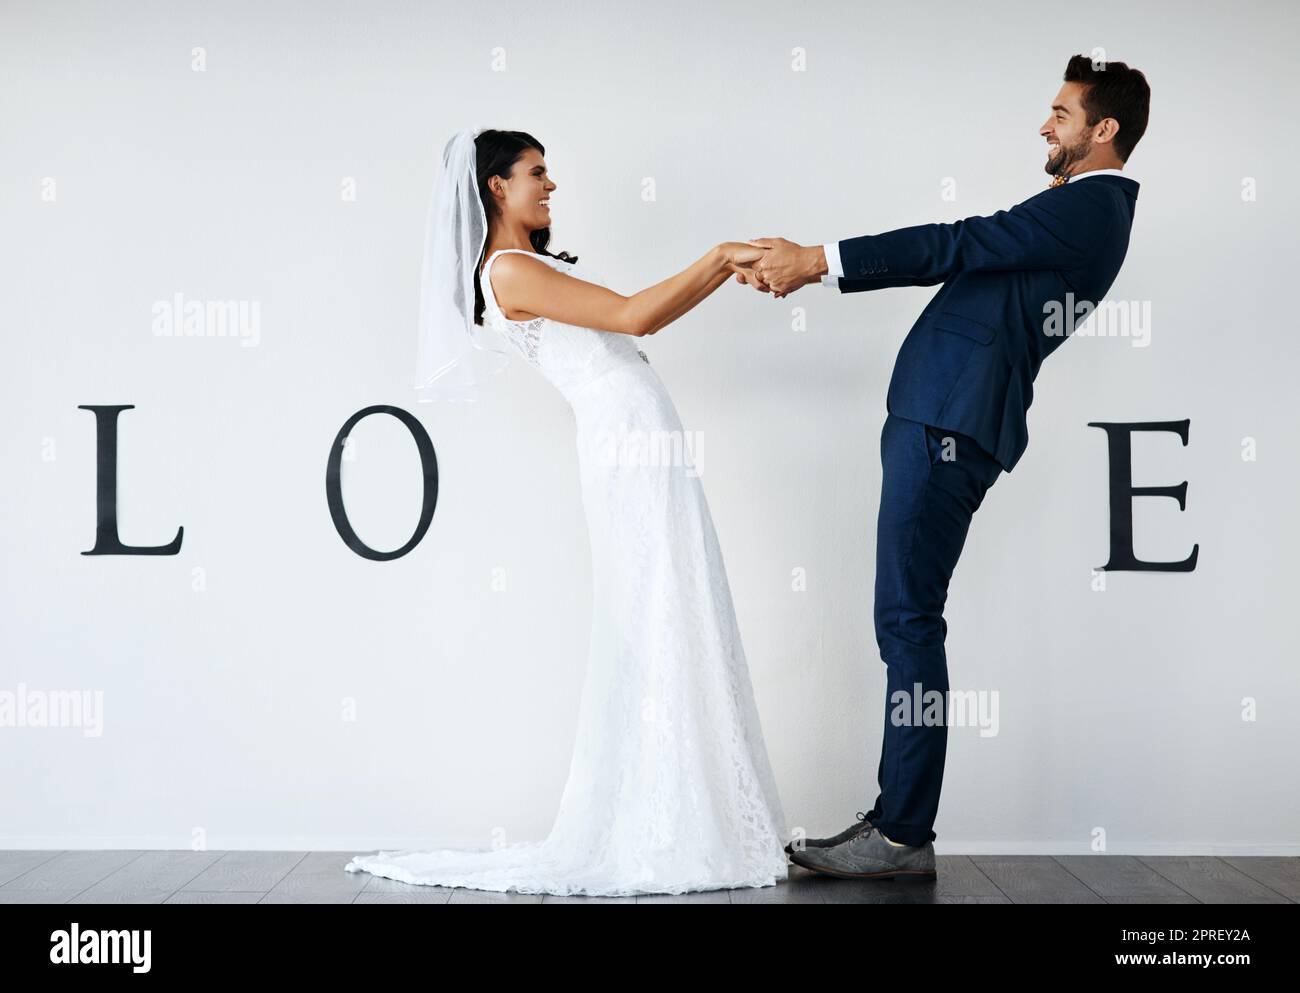 Love spins you around. Concept studio shot of a bride and groom making an V in the word love against a wall. Stock Photo